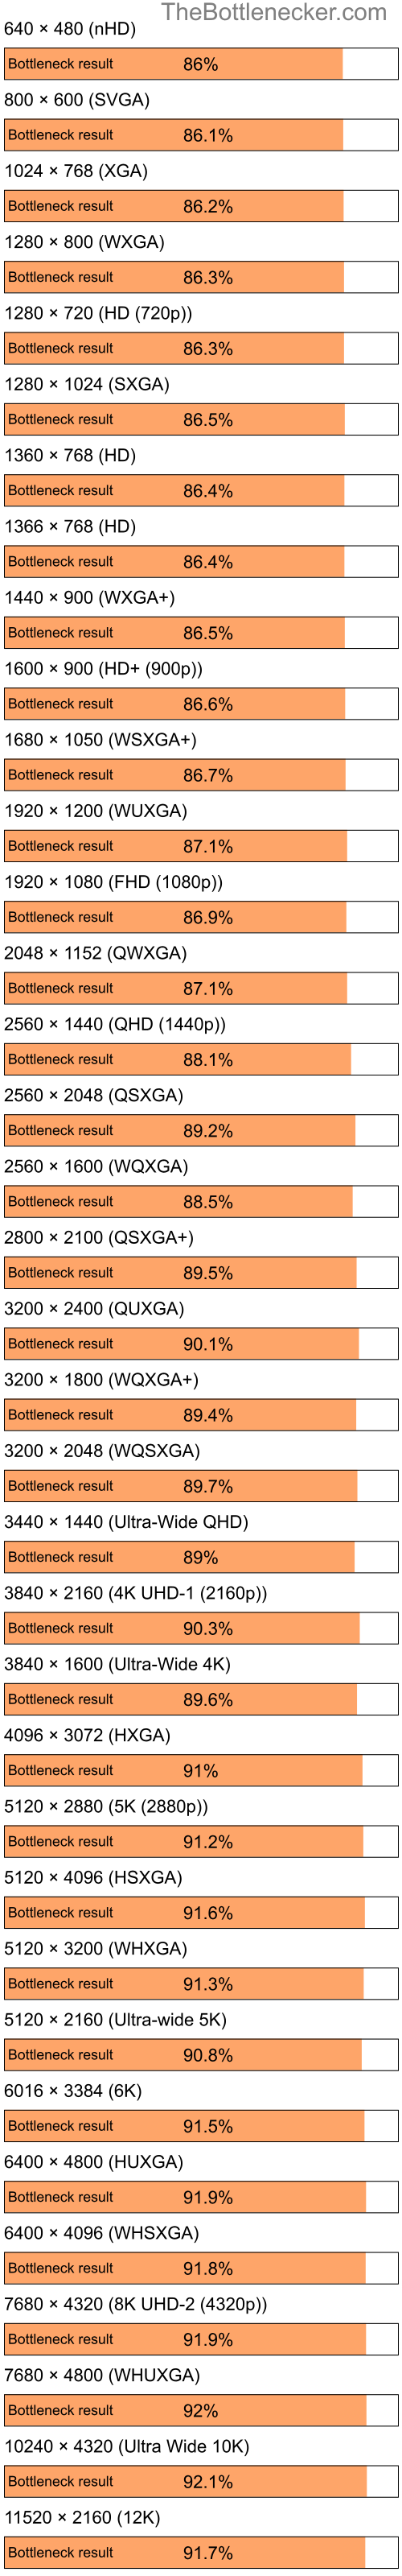 Bottleneck results by resolution for Intel Celeron M 420 and NVIDIA nForce 630M in Graphic Card Intense Tasks